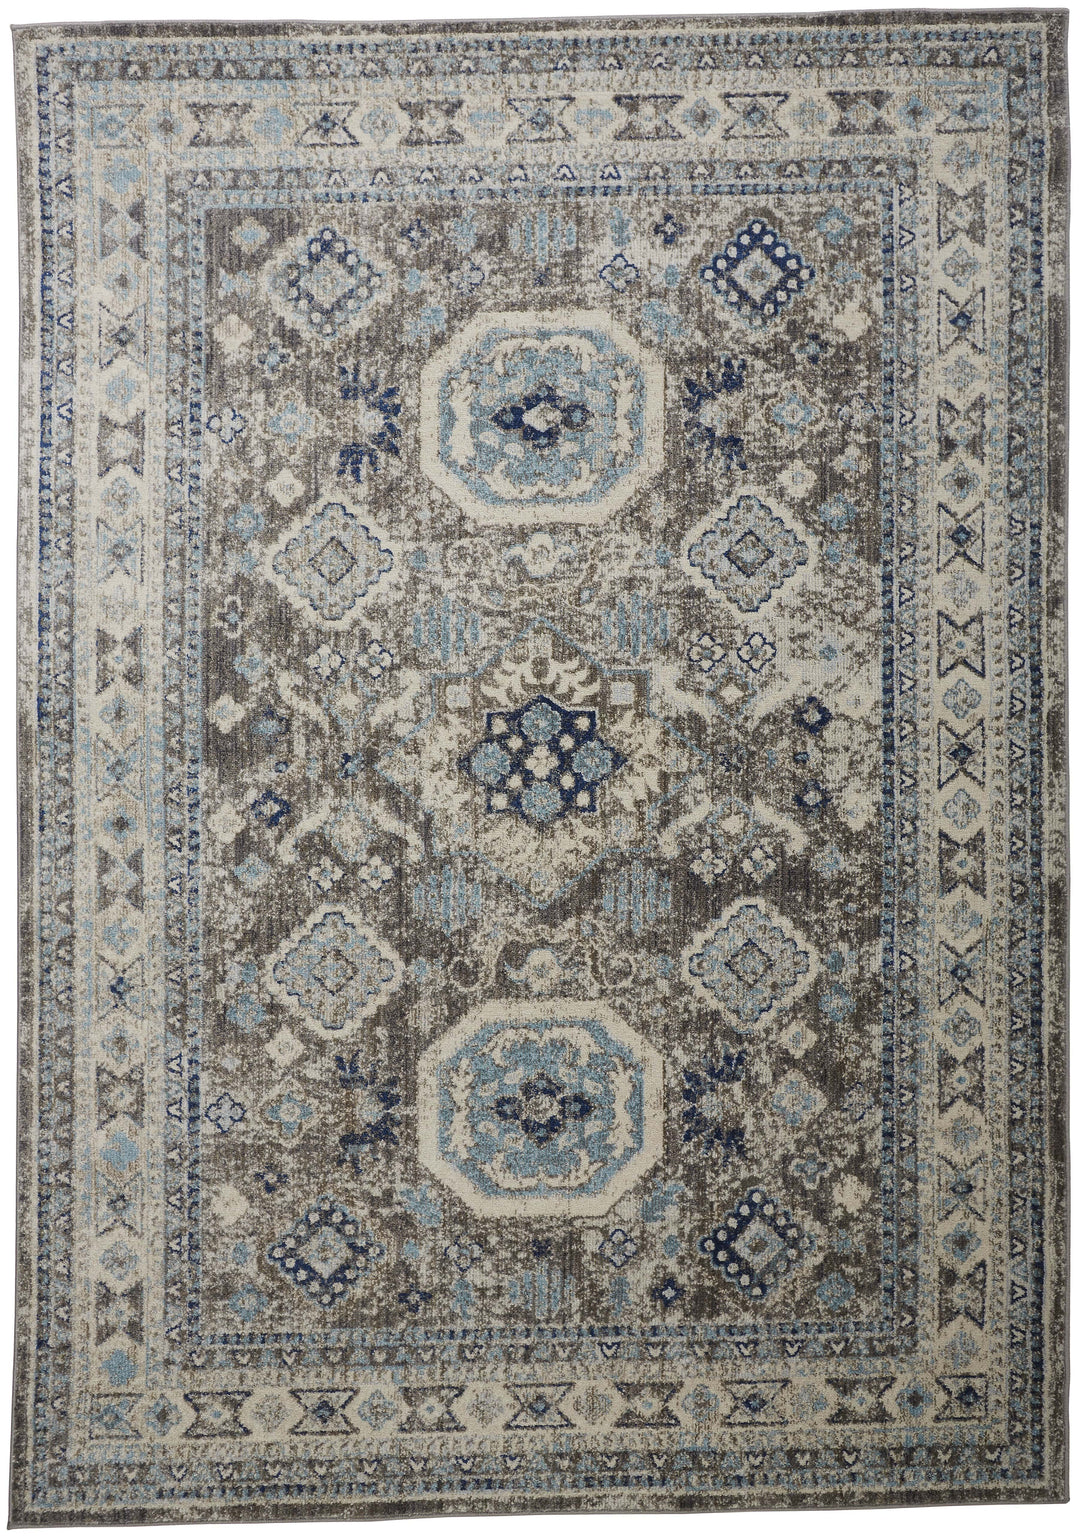 Feizy Feizy Bellini Vintage Bohemian Rug - Delphinium Blue & Gray - Available in 8 Sizes 5'-3" x 7'-6" I78I3137BLUMLTE76